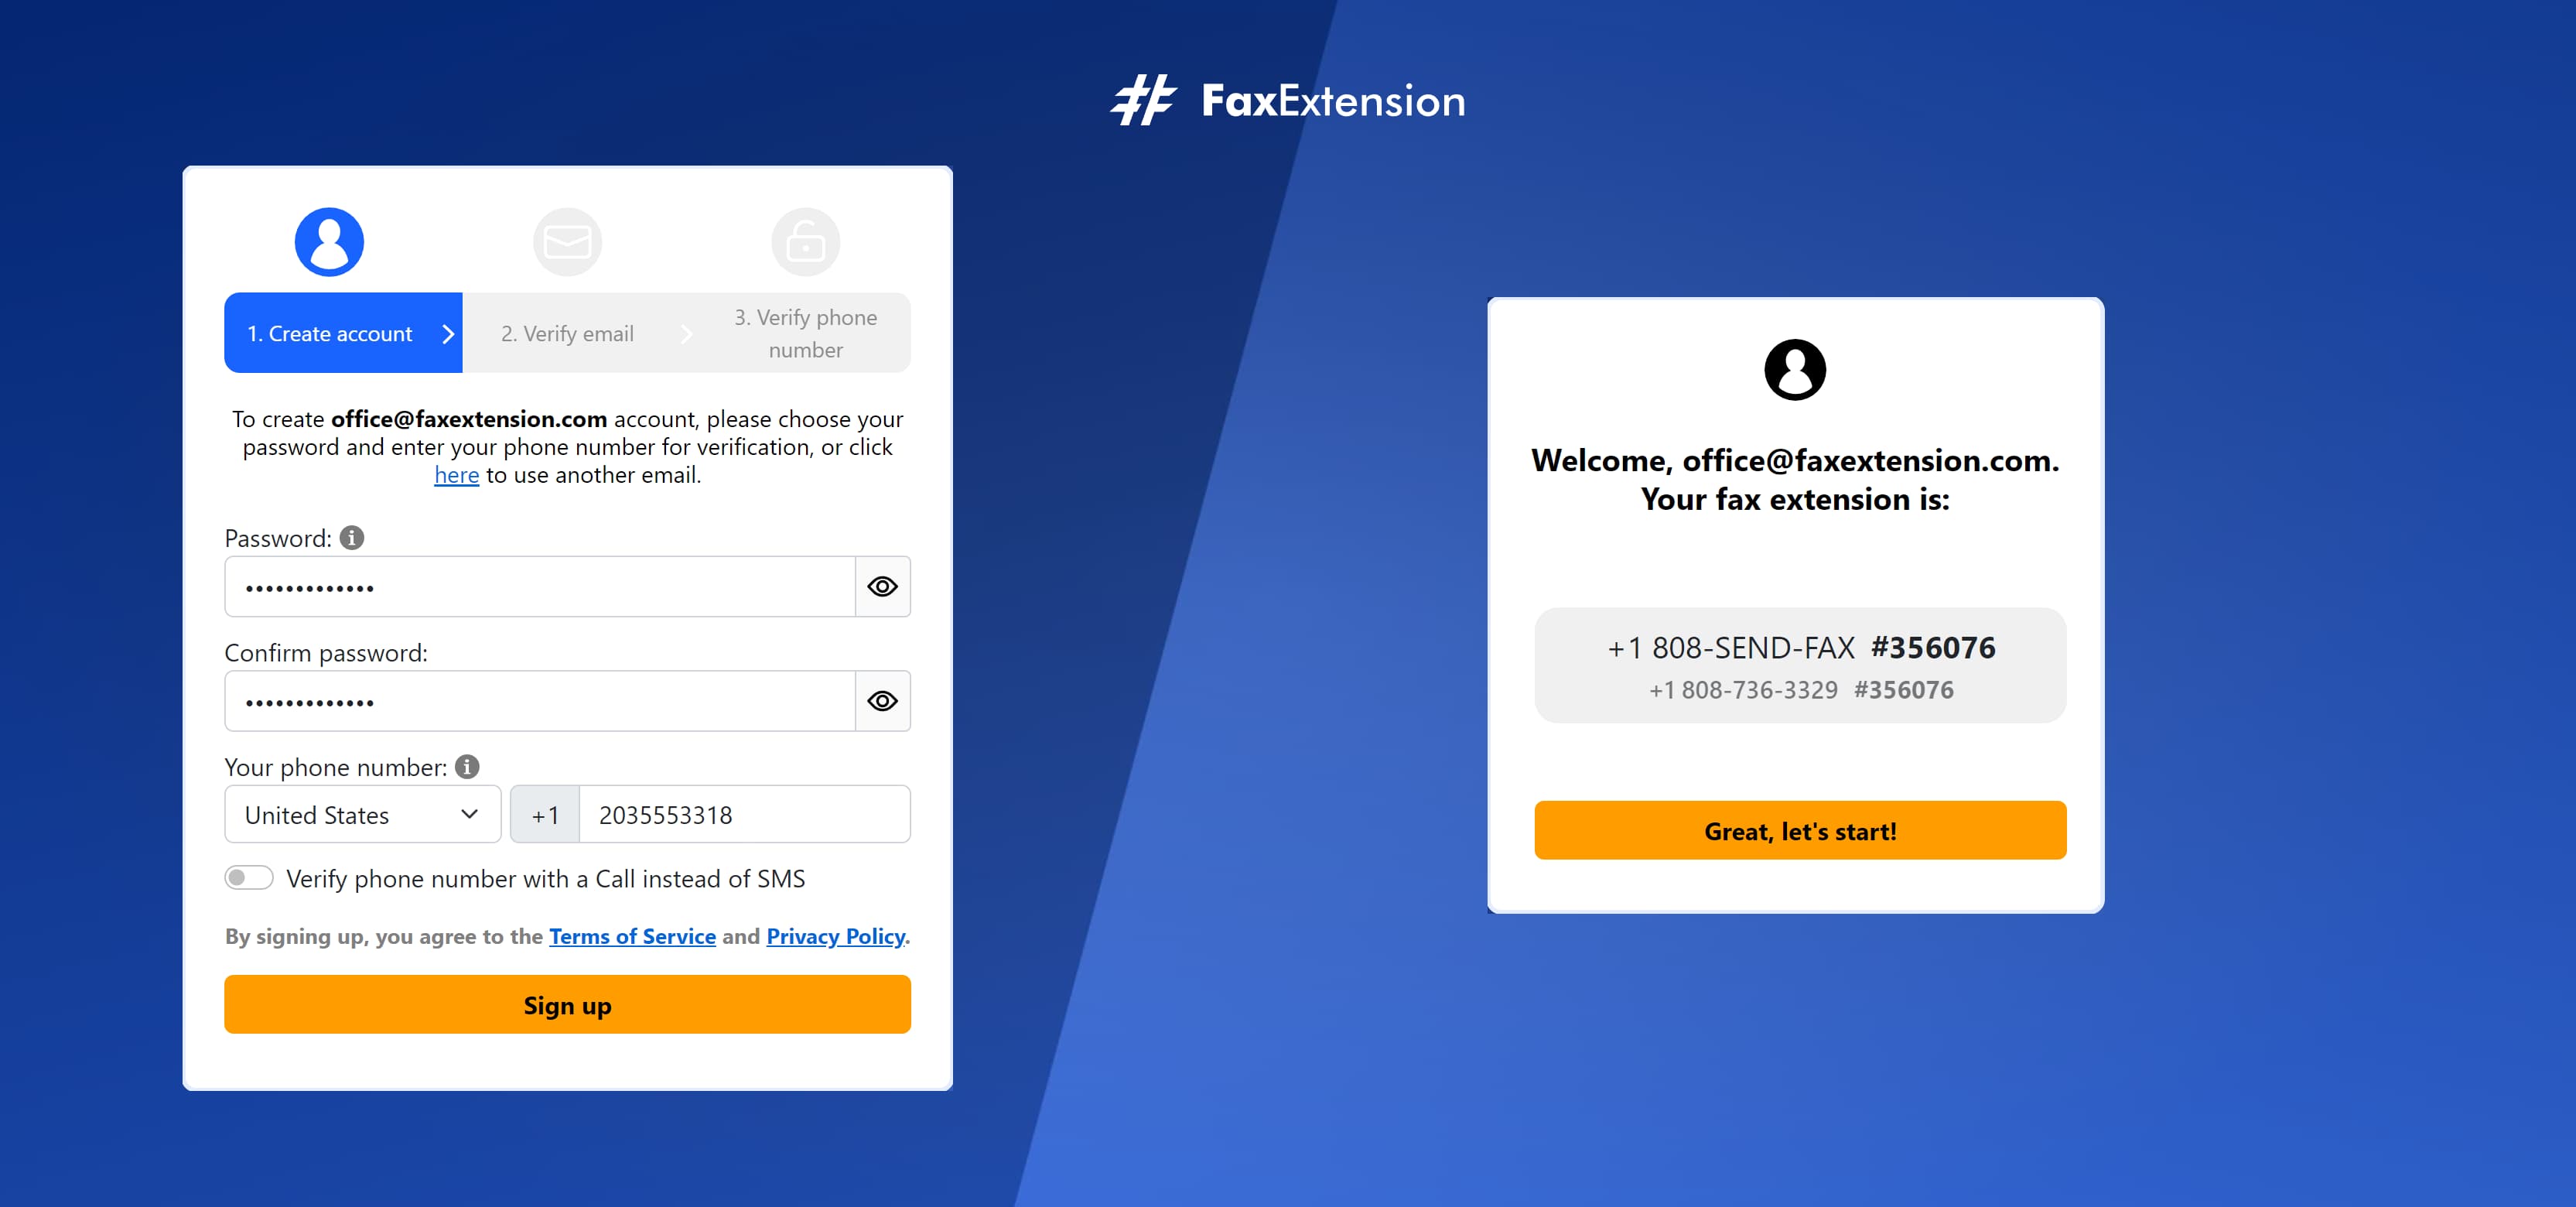 Get your own free fax number extension instantly